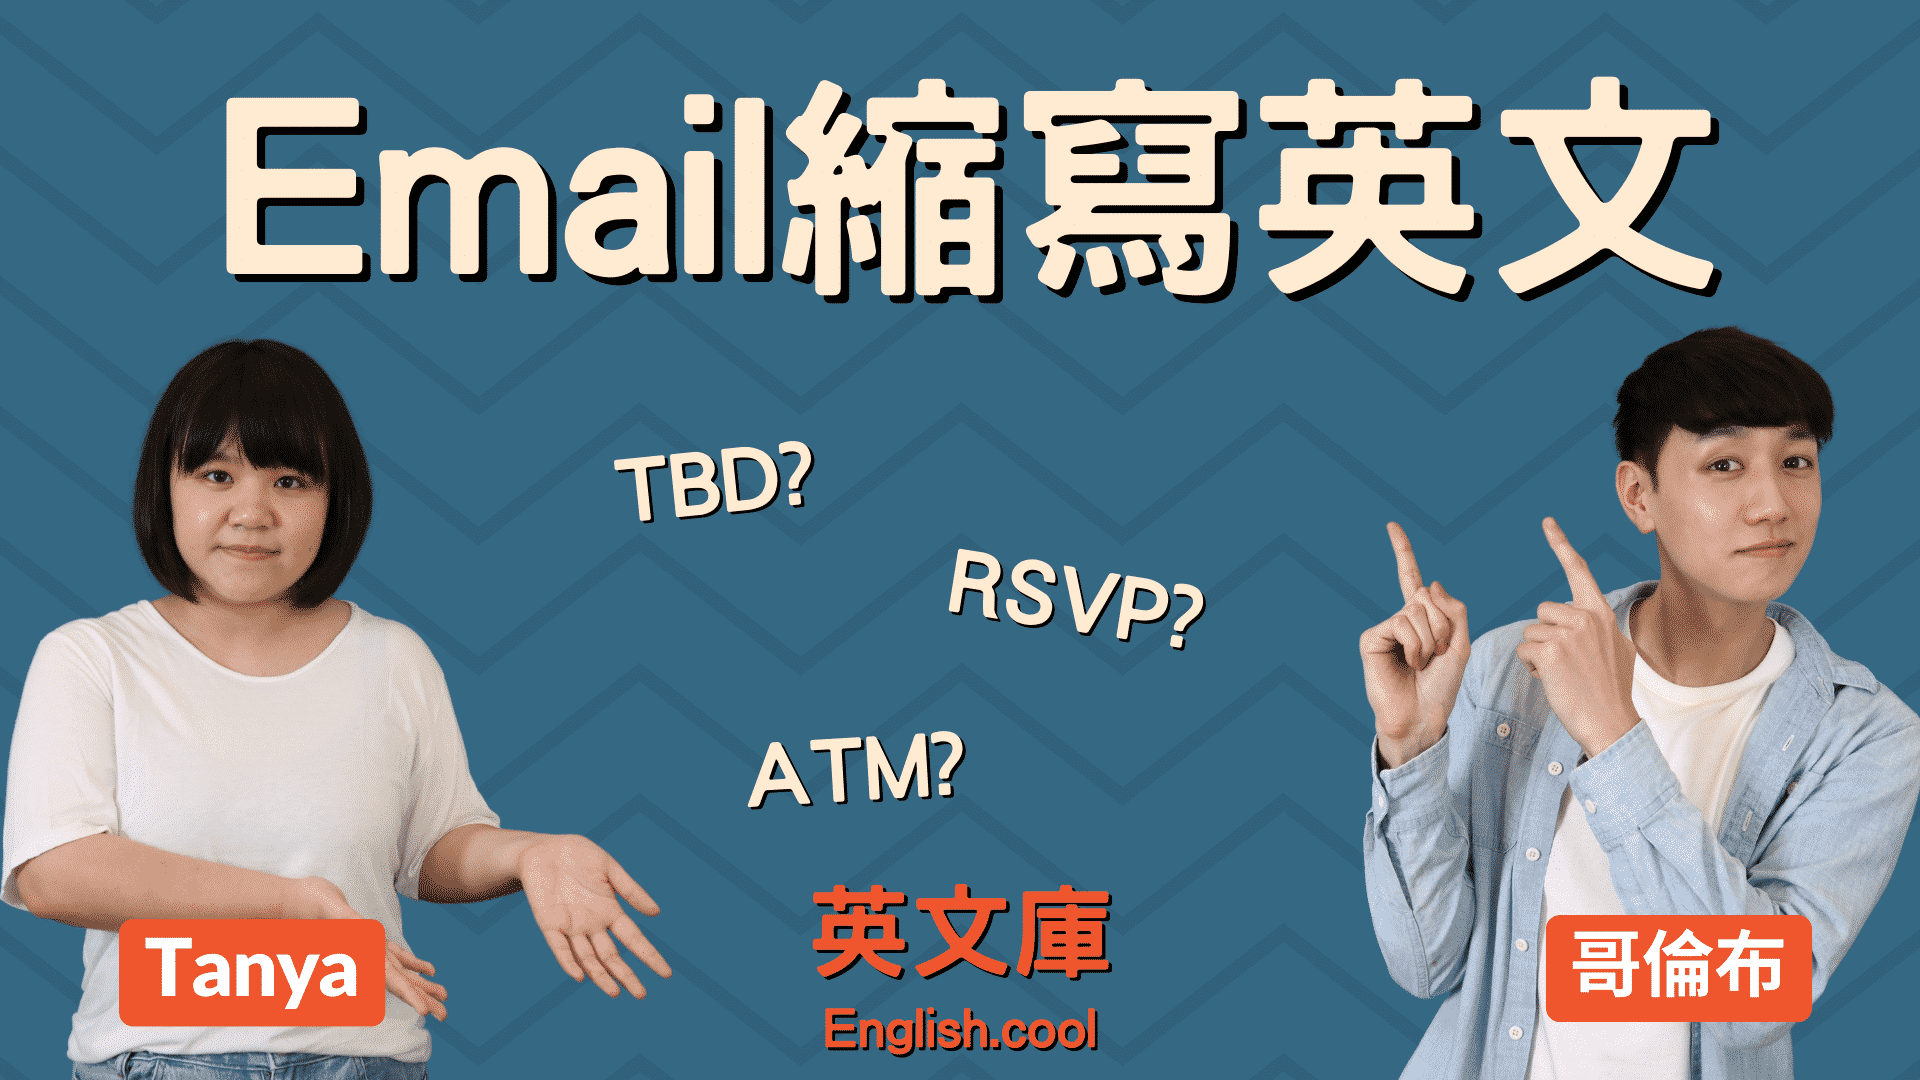 You are currently viewing 【email英文】TBD、RSVP、ATM 等縮寫都是什麼意思？